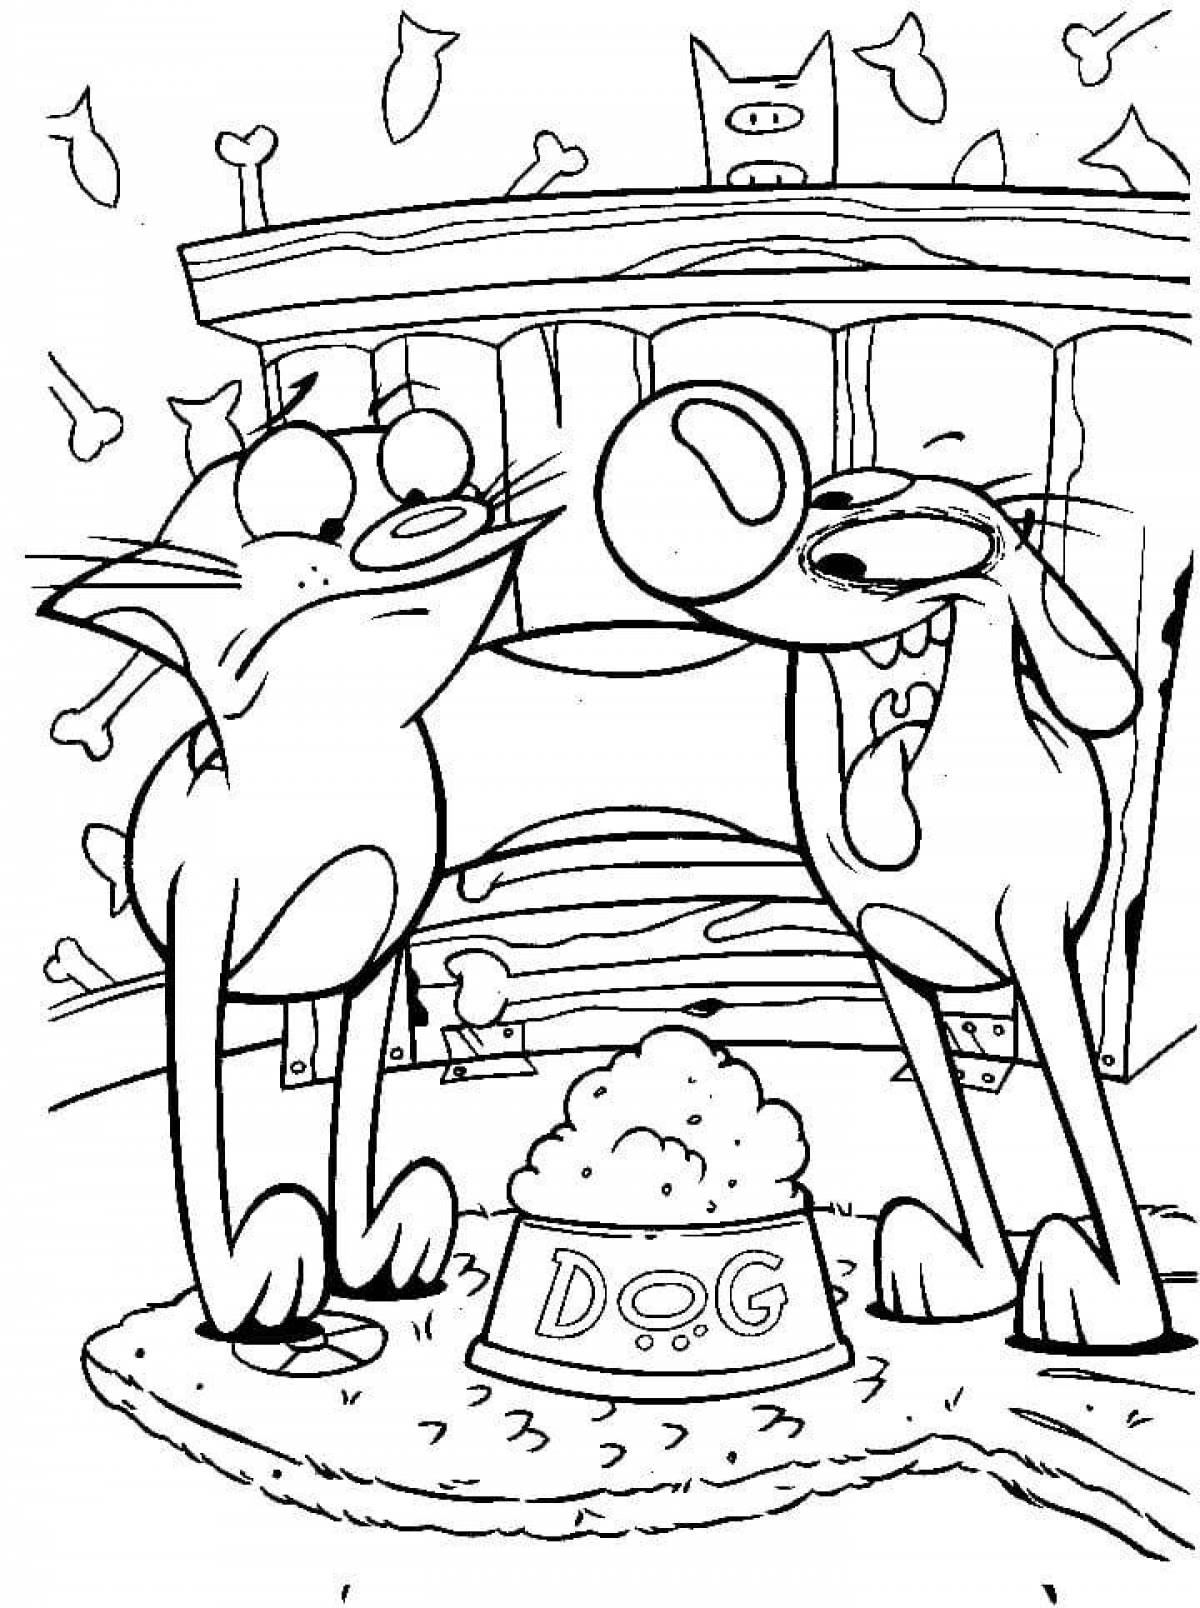 Colorful cat dog coloring page